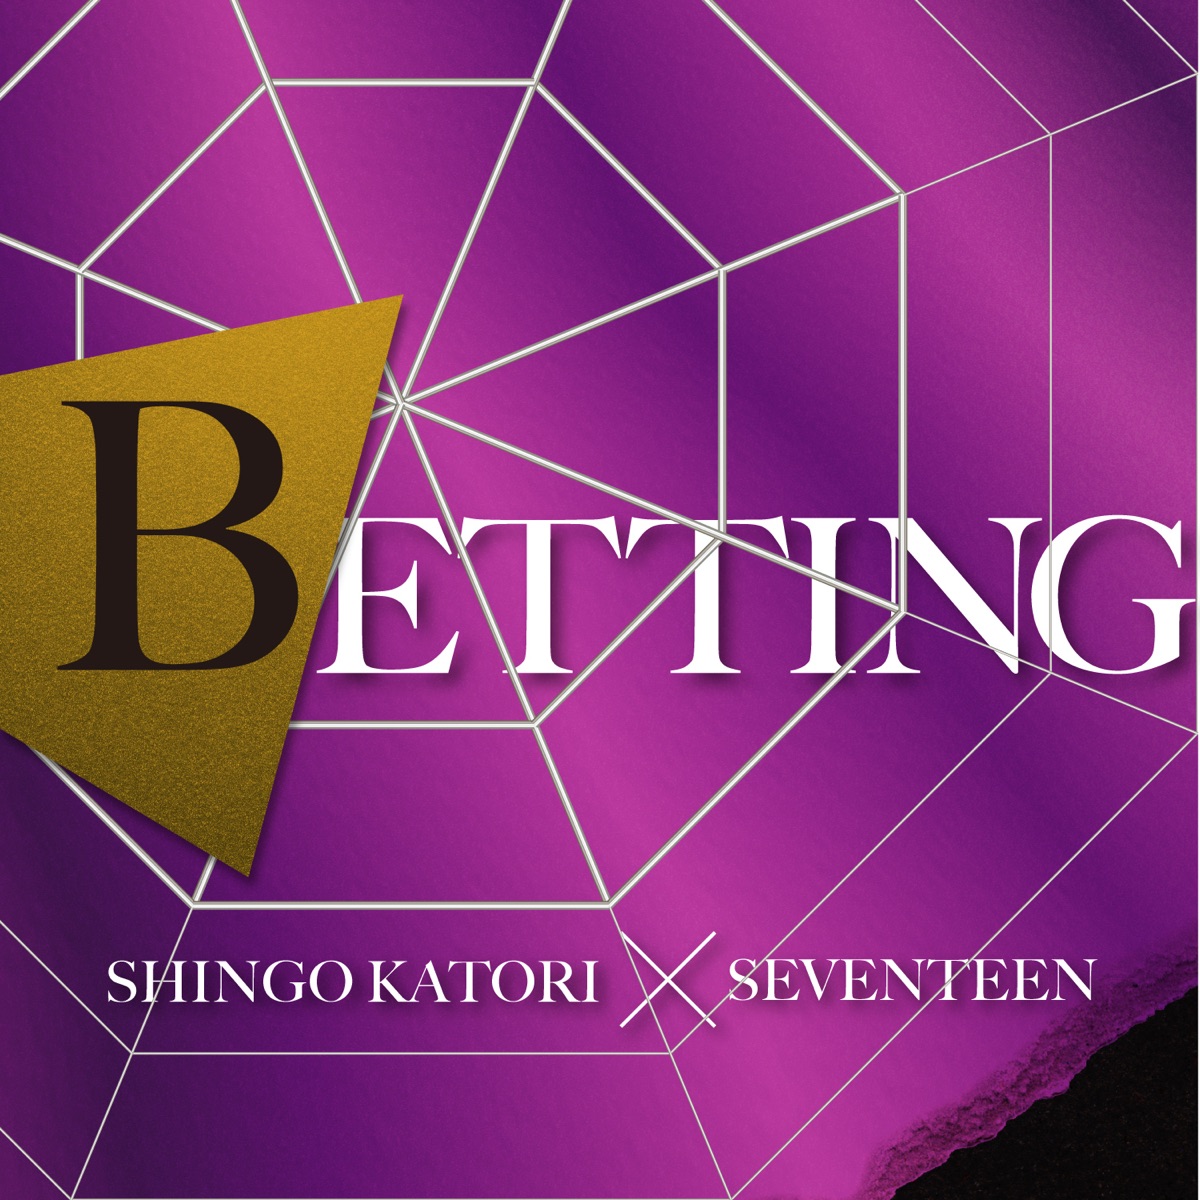 Cover art for『Shingo Katori × SEVENTEEN - BETTING』from the release『BETTING』